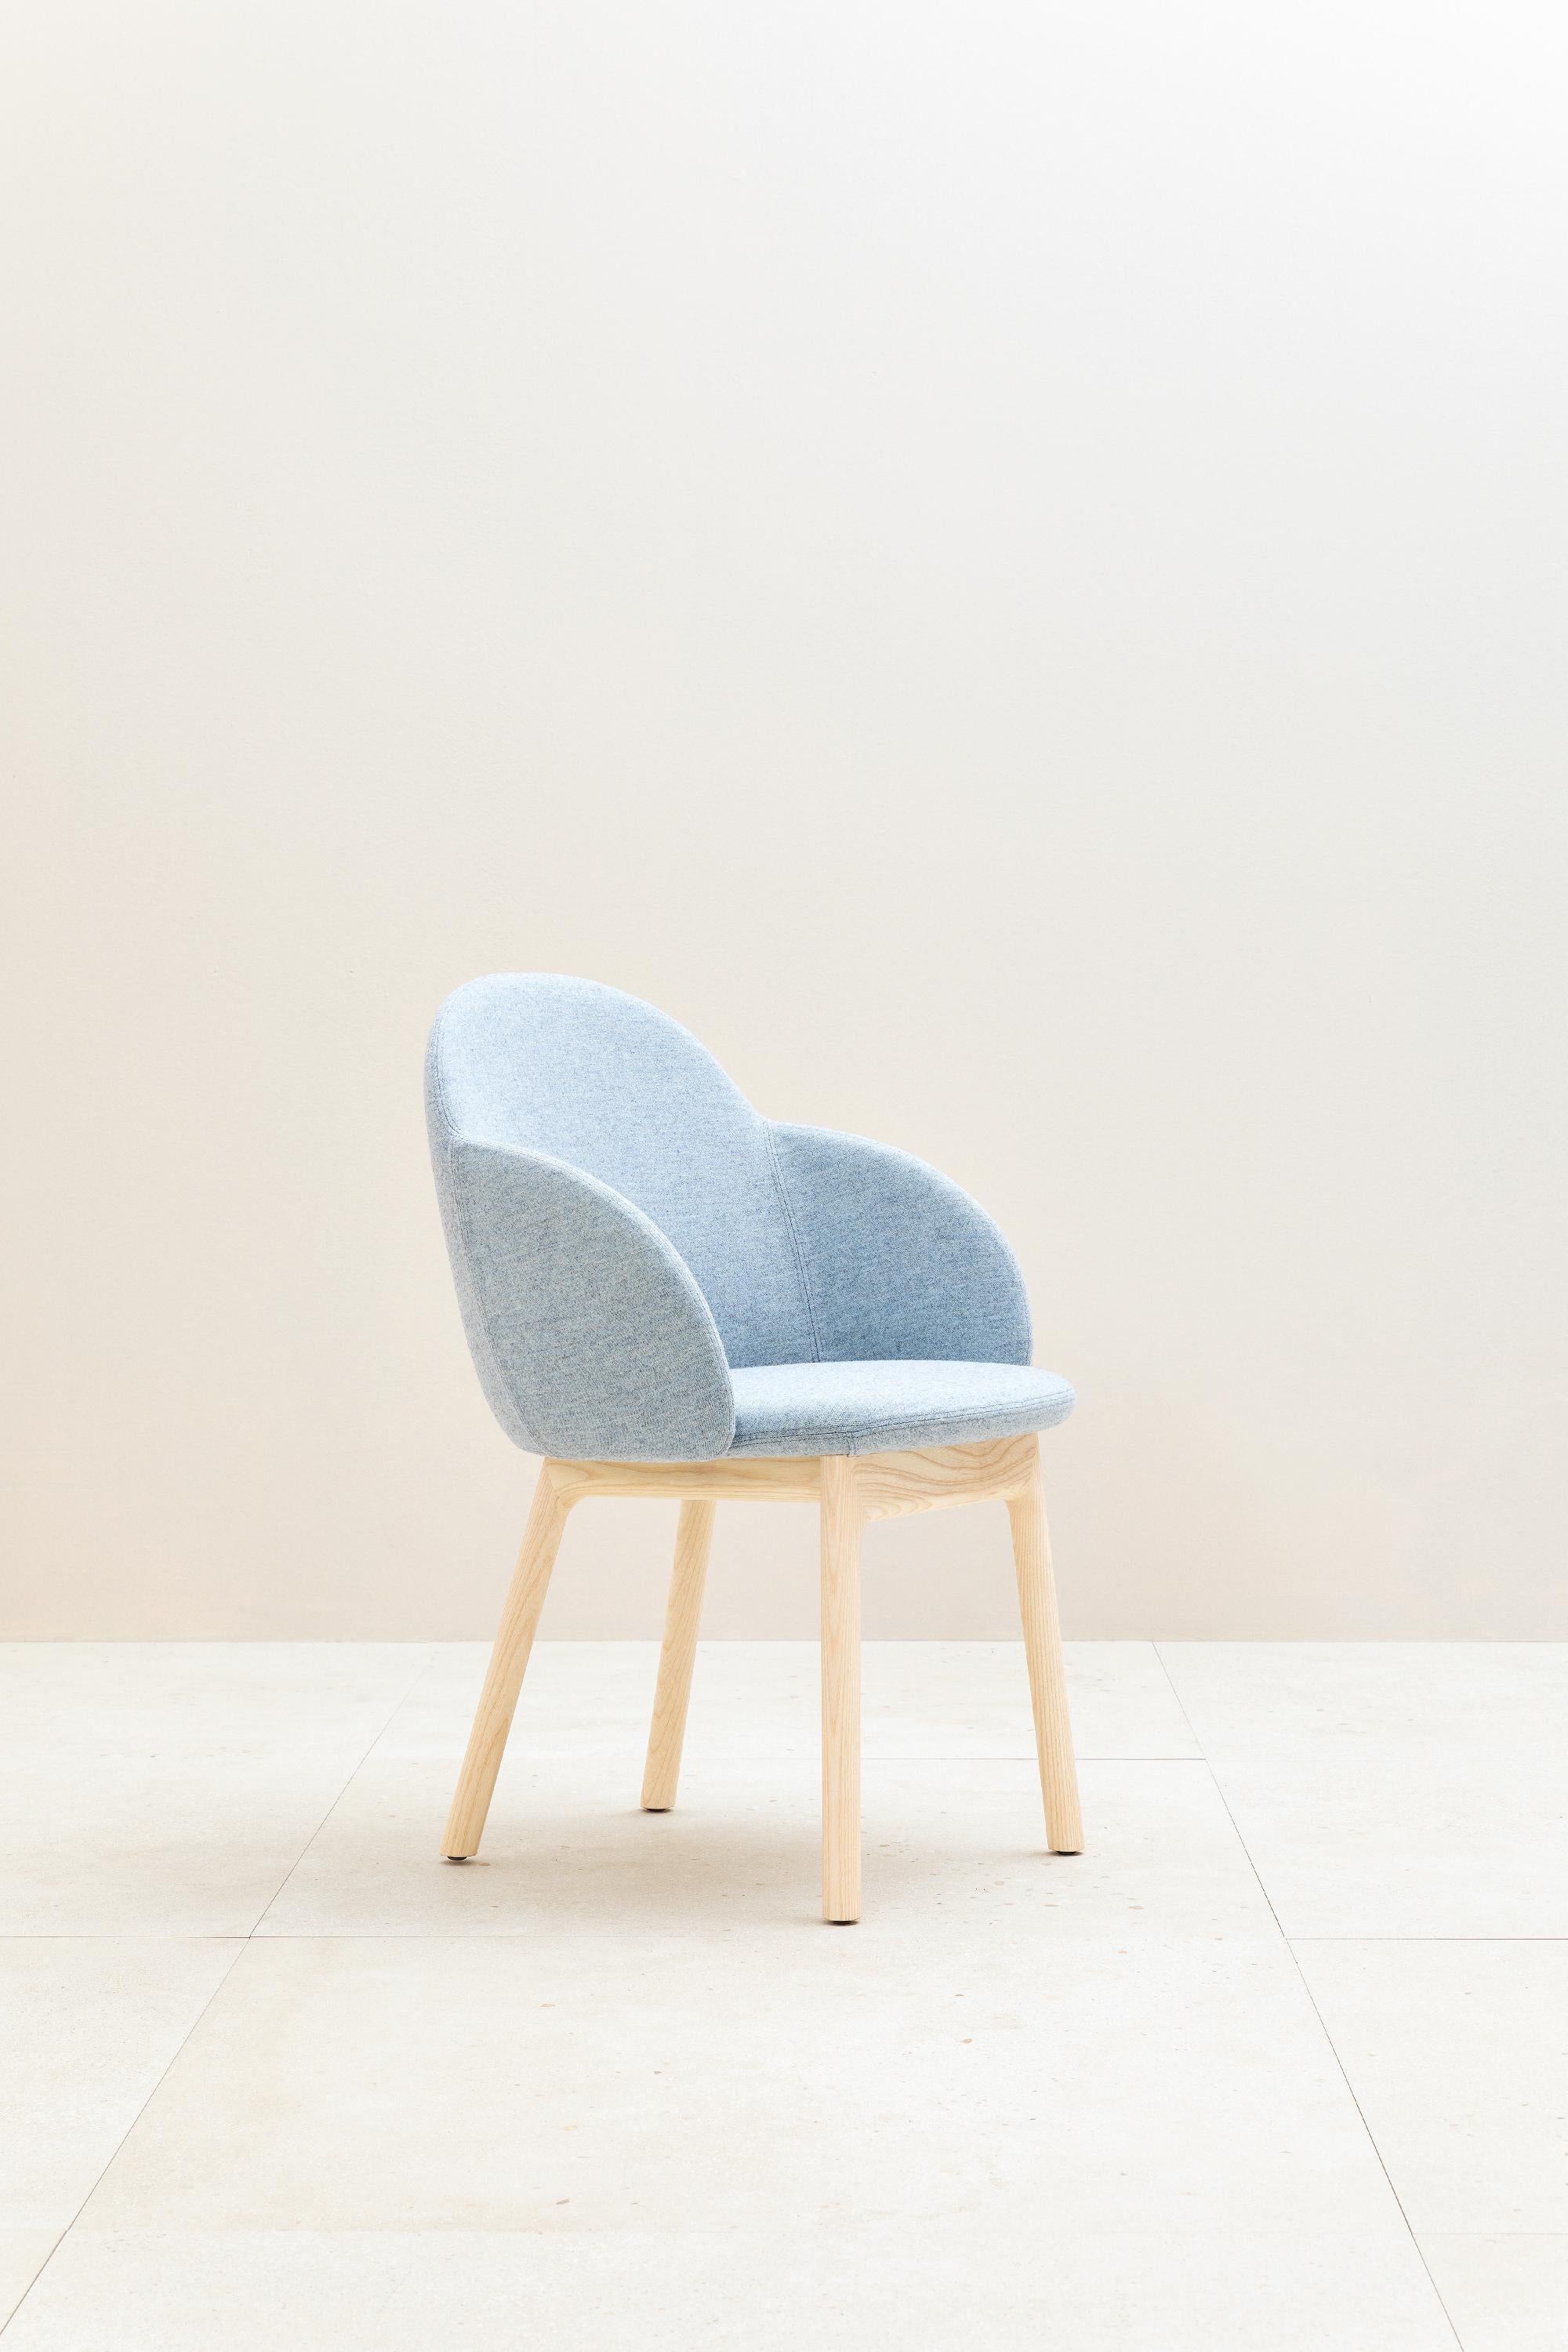 Iola lives design with an international approach, focusing on the ergonomics of shapes, while maintaining a refined and characterizing appearance. We gave the body the shape of a shell, producing it in polyurethane foam. Under the advice of the most